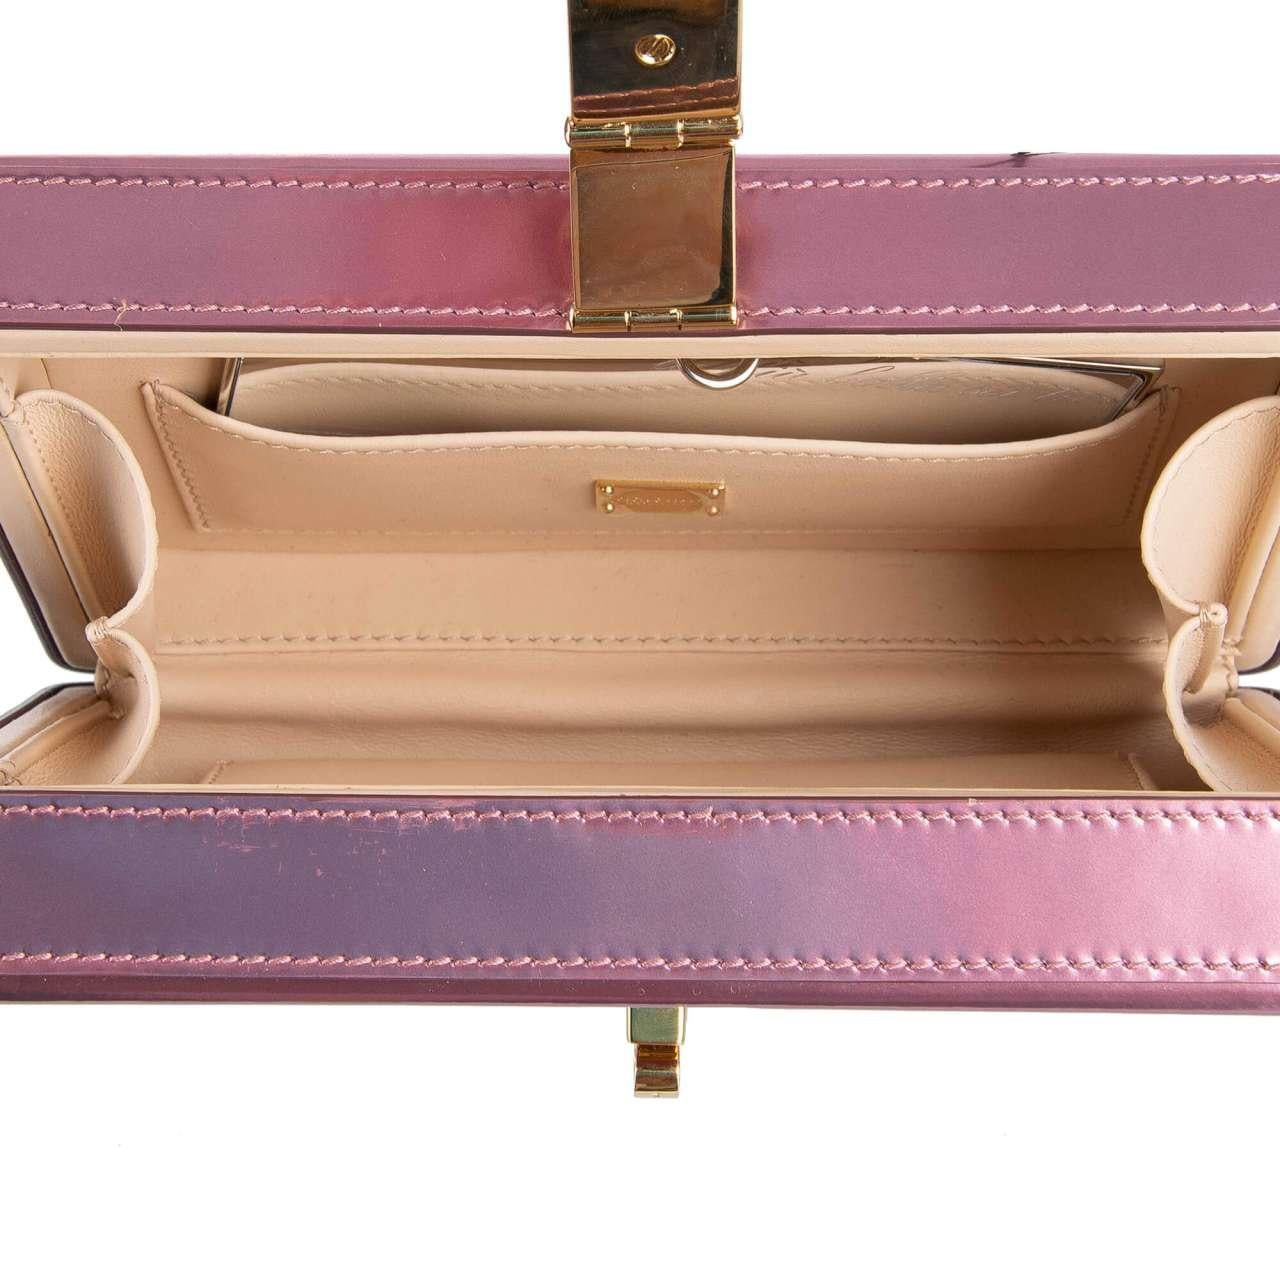 Dolce & Gabbana - Laminated Metallic Leather Bag DOLCE BOX Rose Pink For Sale 3